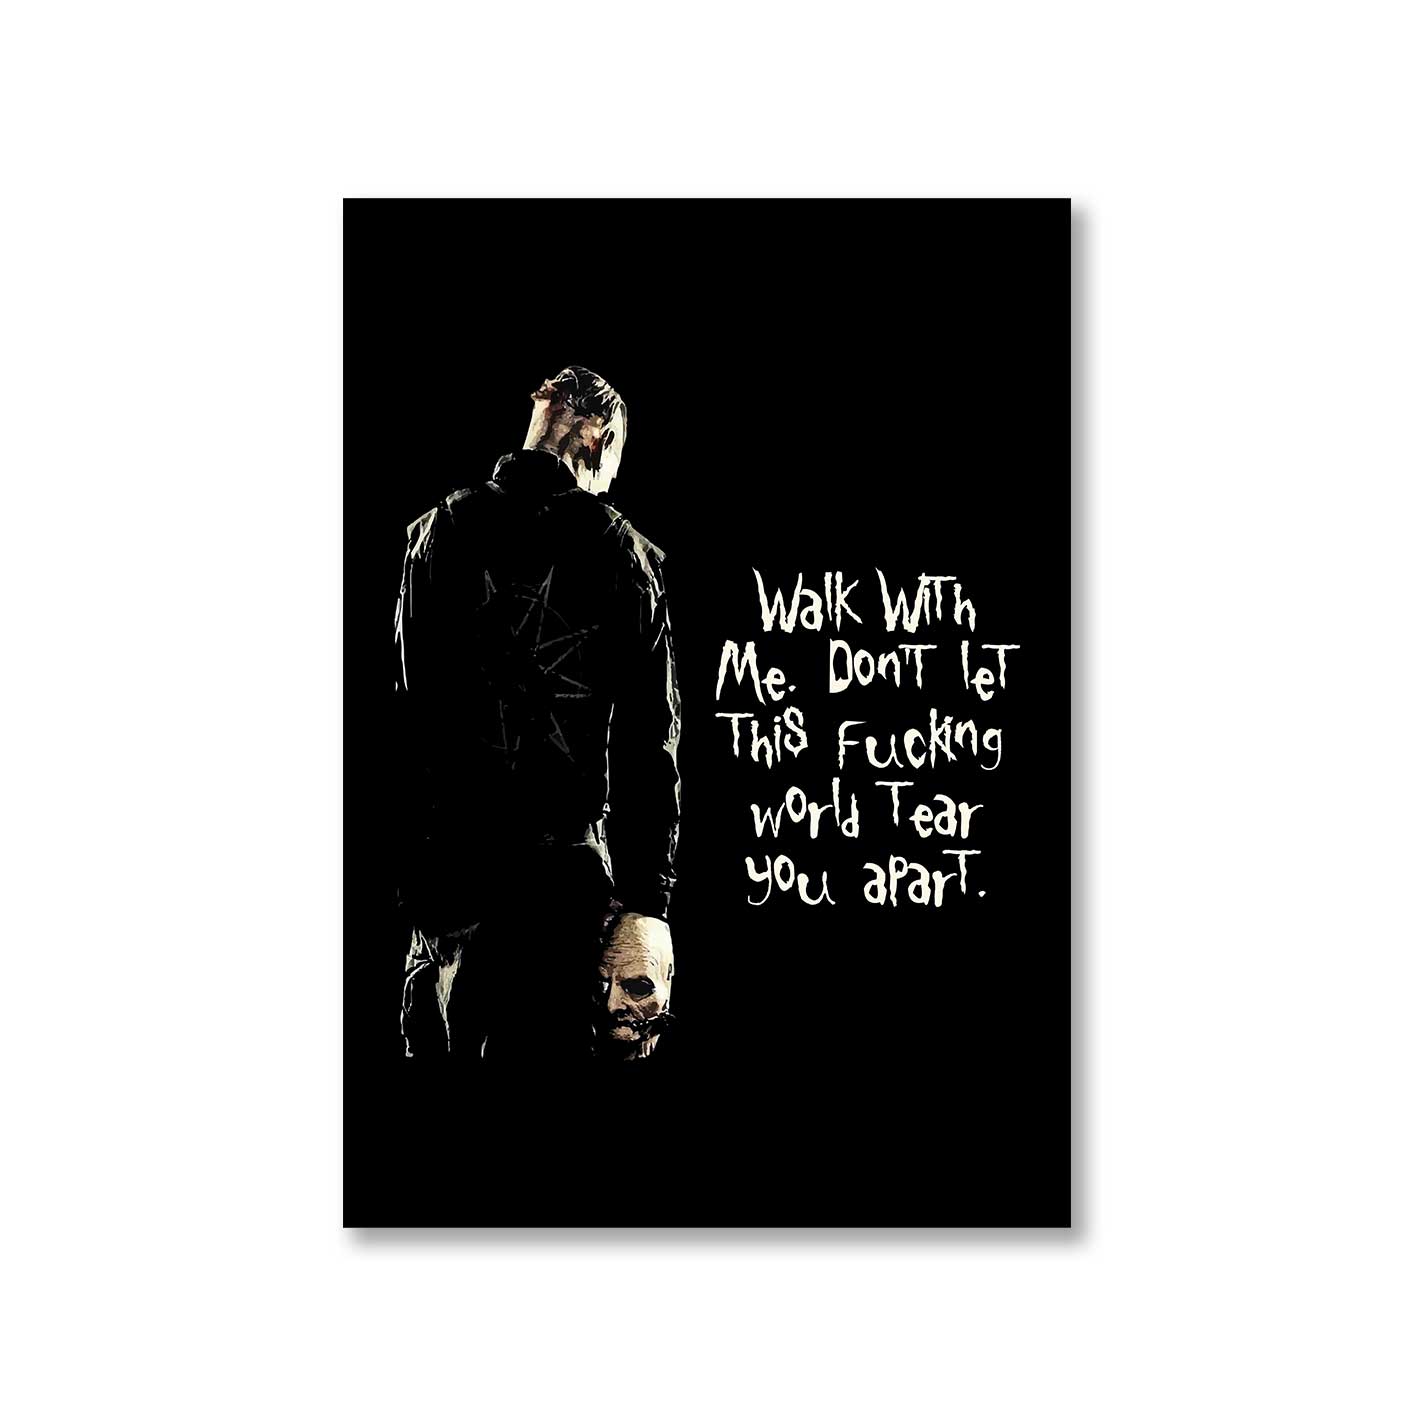 slipknot xix poster wall art buy online united states of america usa the banyan tee tbt a4